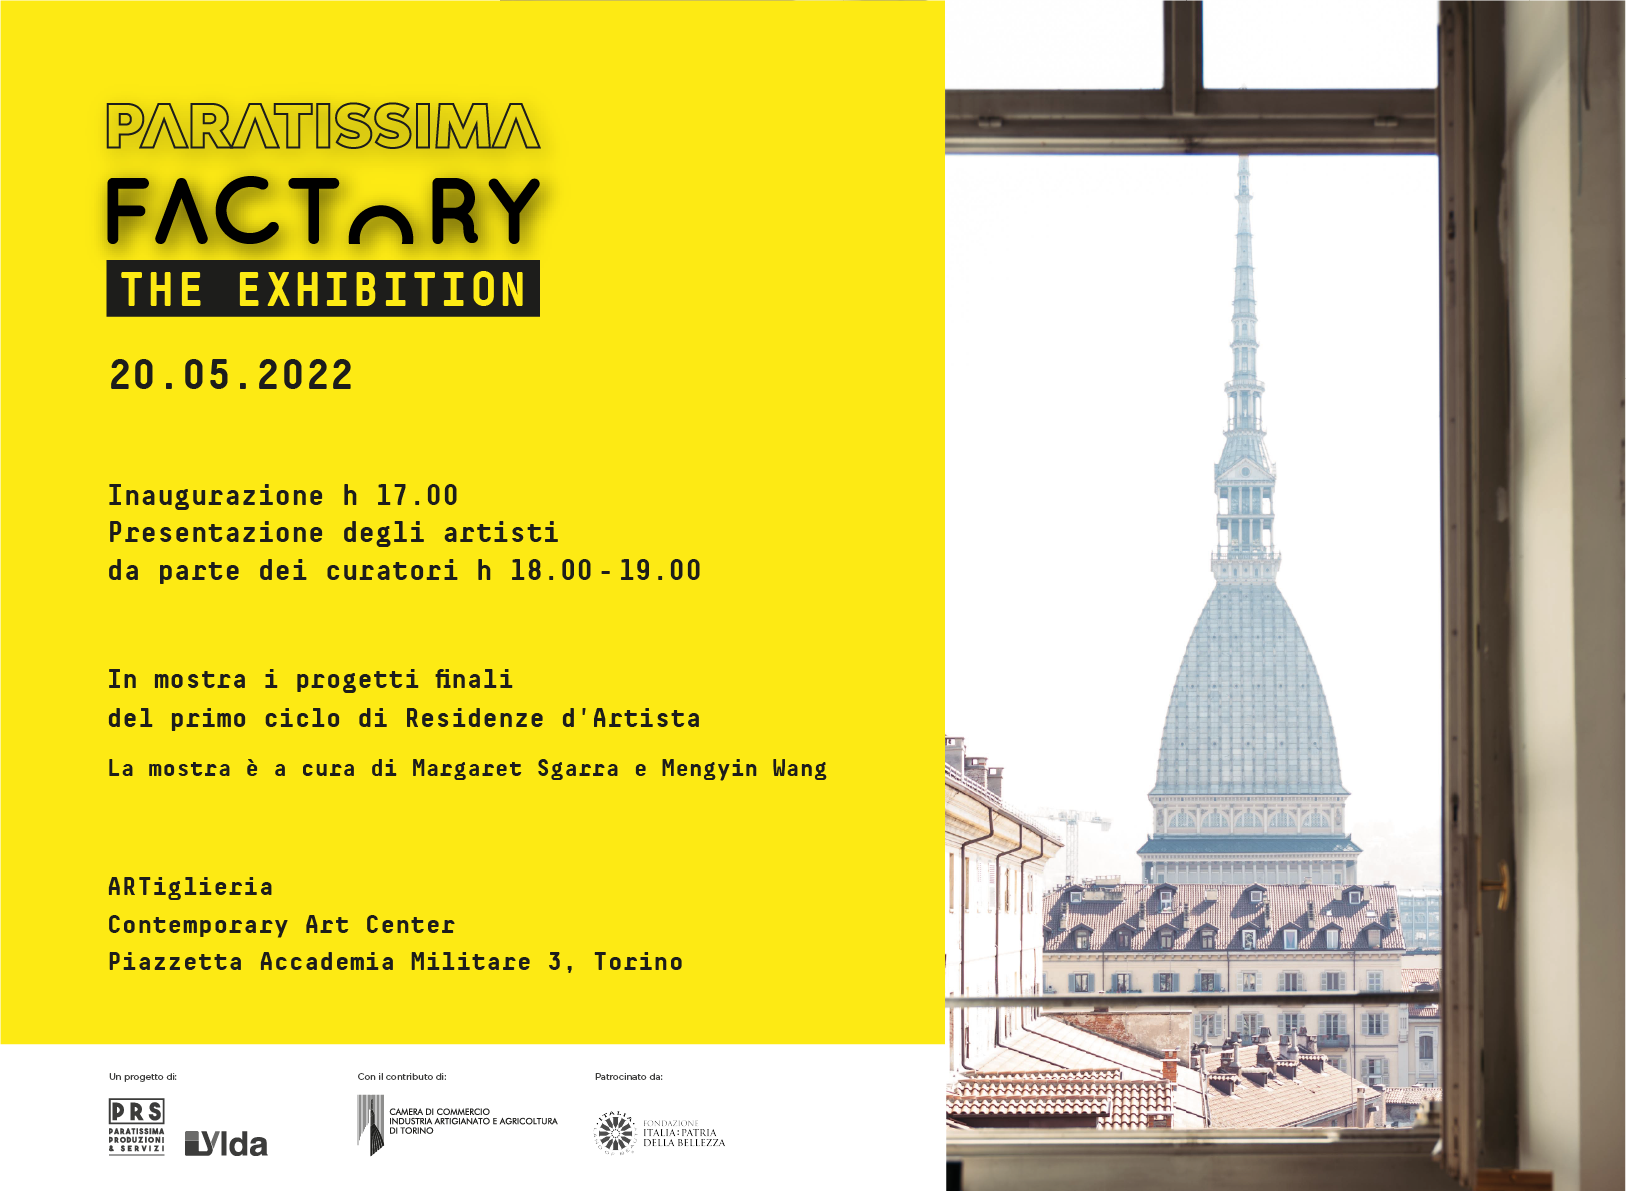 Paratissima Factory – The Exhibition